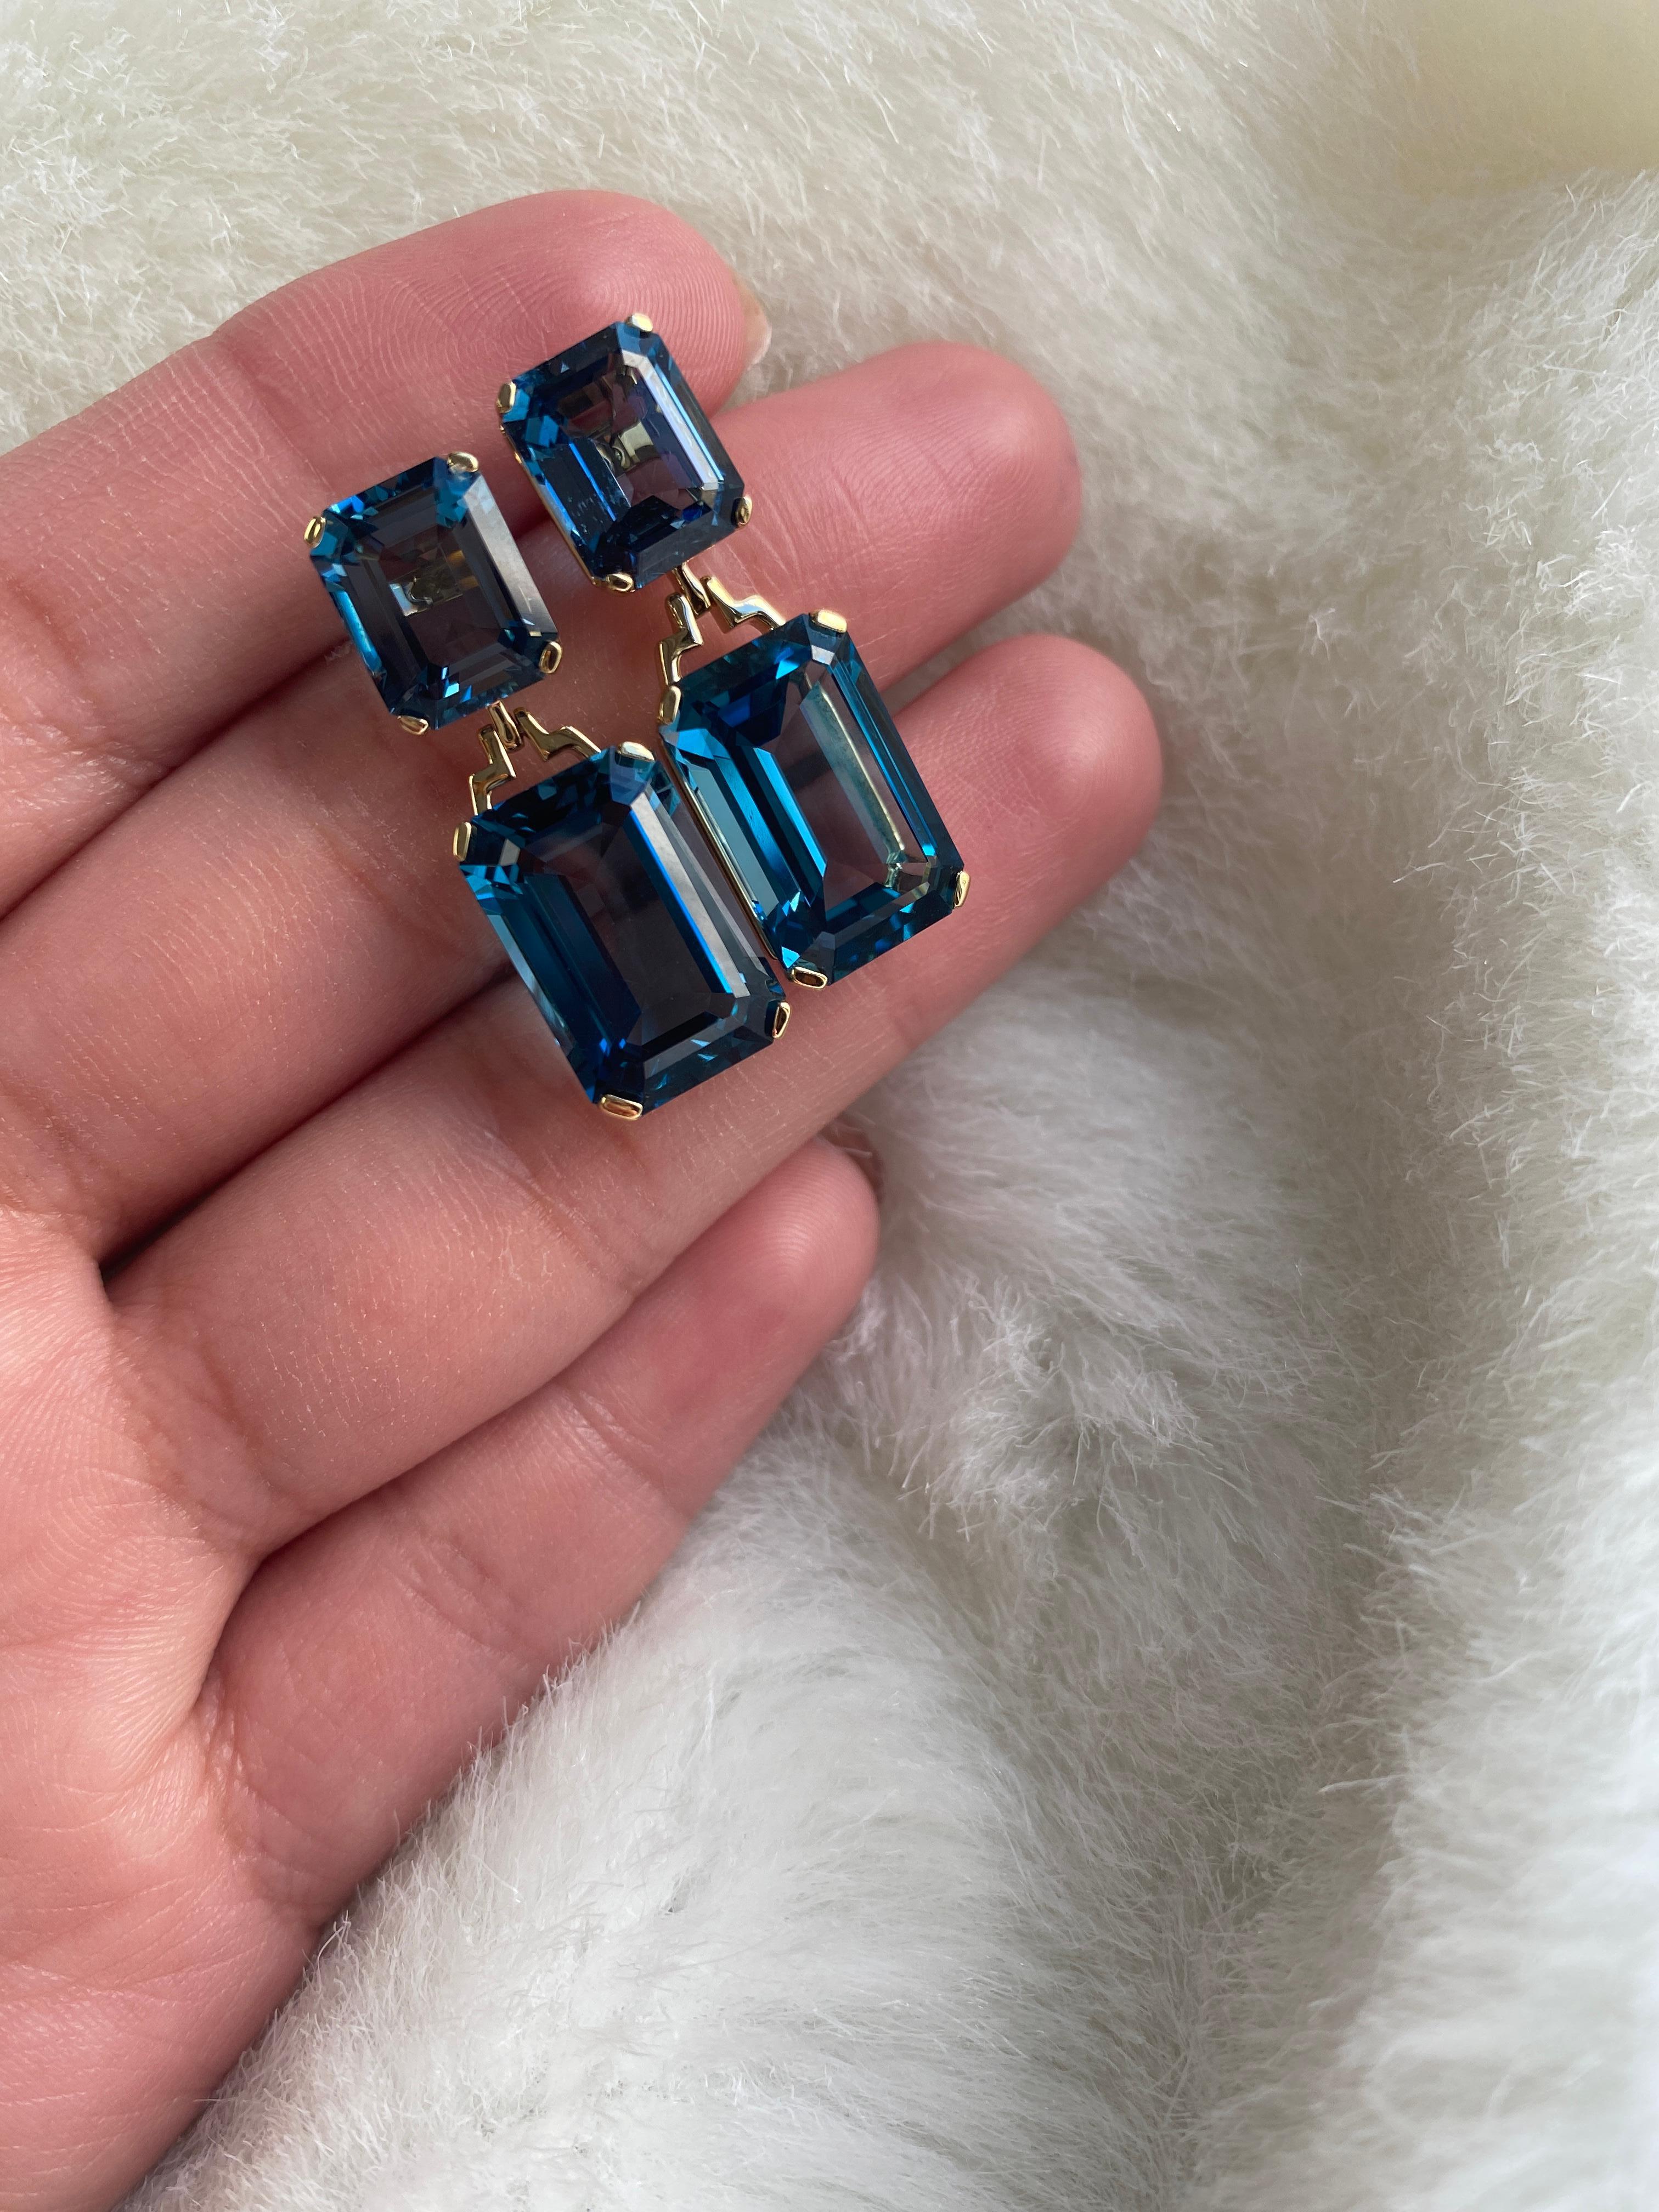 These London Blue Topaz Emerald Cut Earrings in 18K Yellow Gold from the 'Gossip' Collection are a stunning and sophisticated accessory. The deep blue hue of the London blue topaz stones, combined with the elegant emerald cut design, creates a